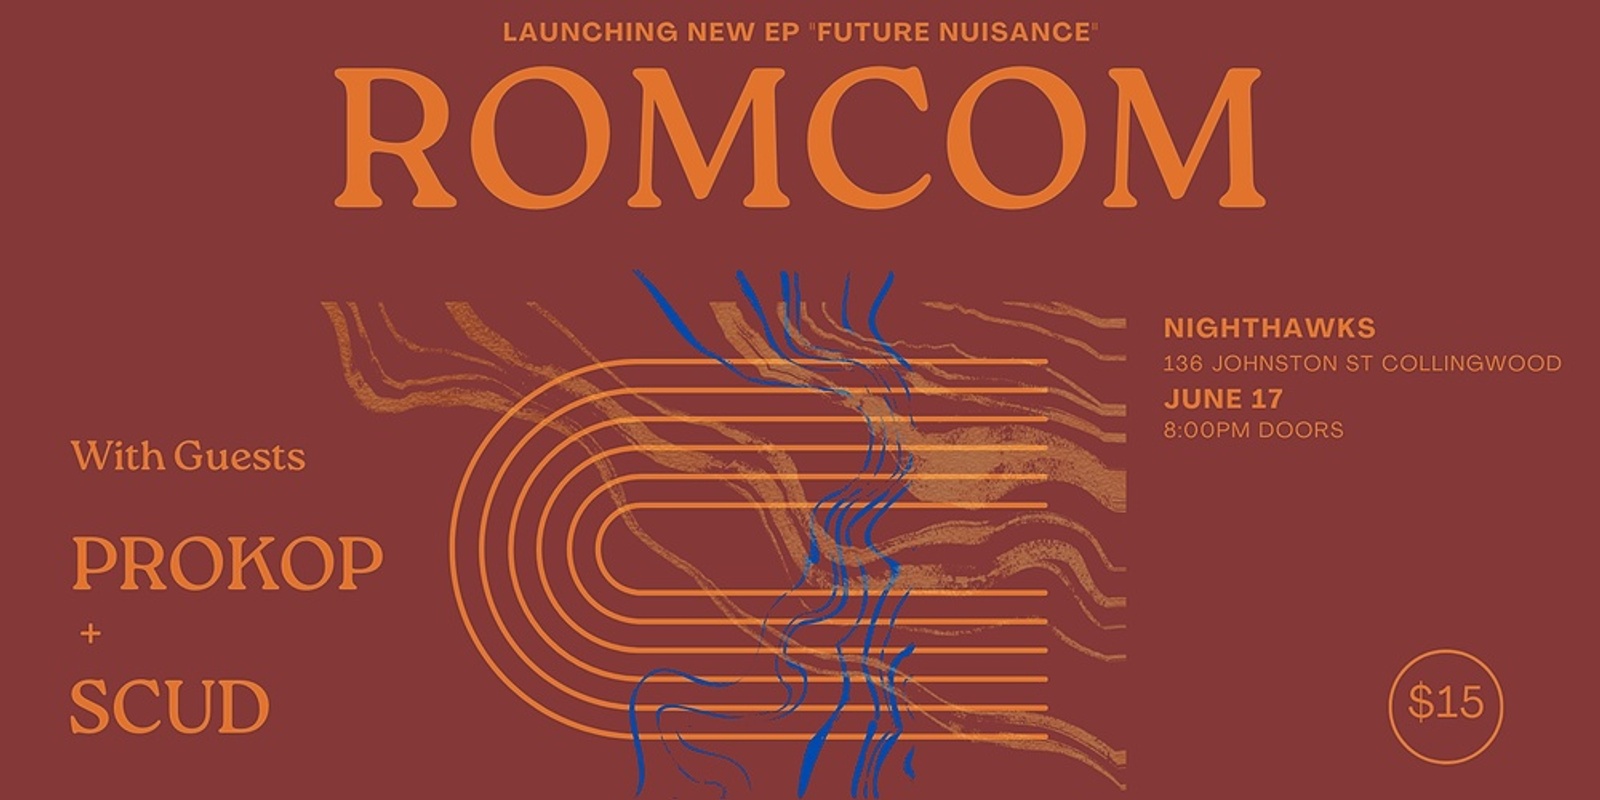 Banner image for Romcom "Future Nuisance" EP Launch w/ Prokop + SCUD